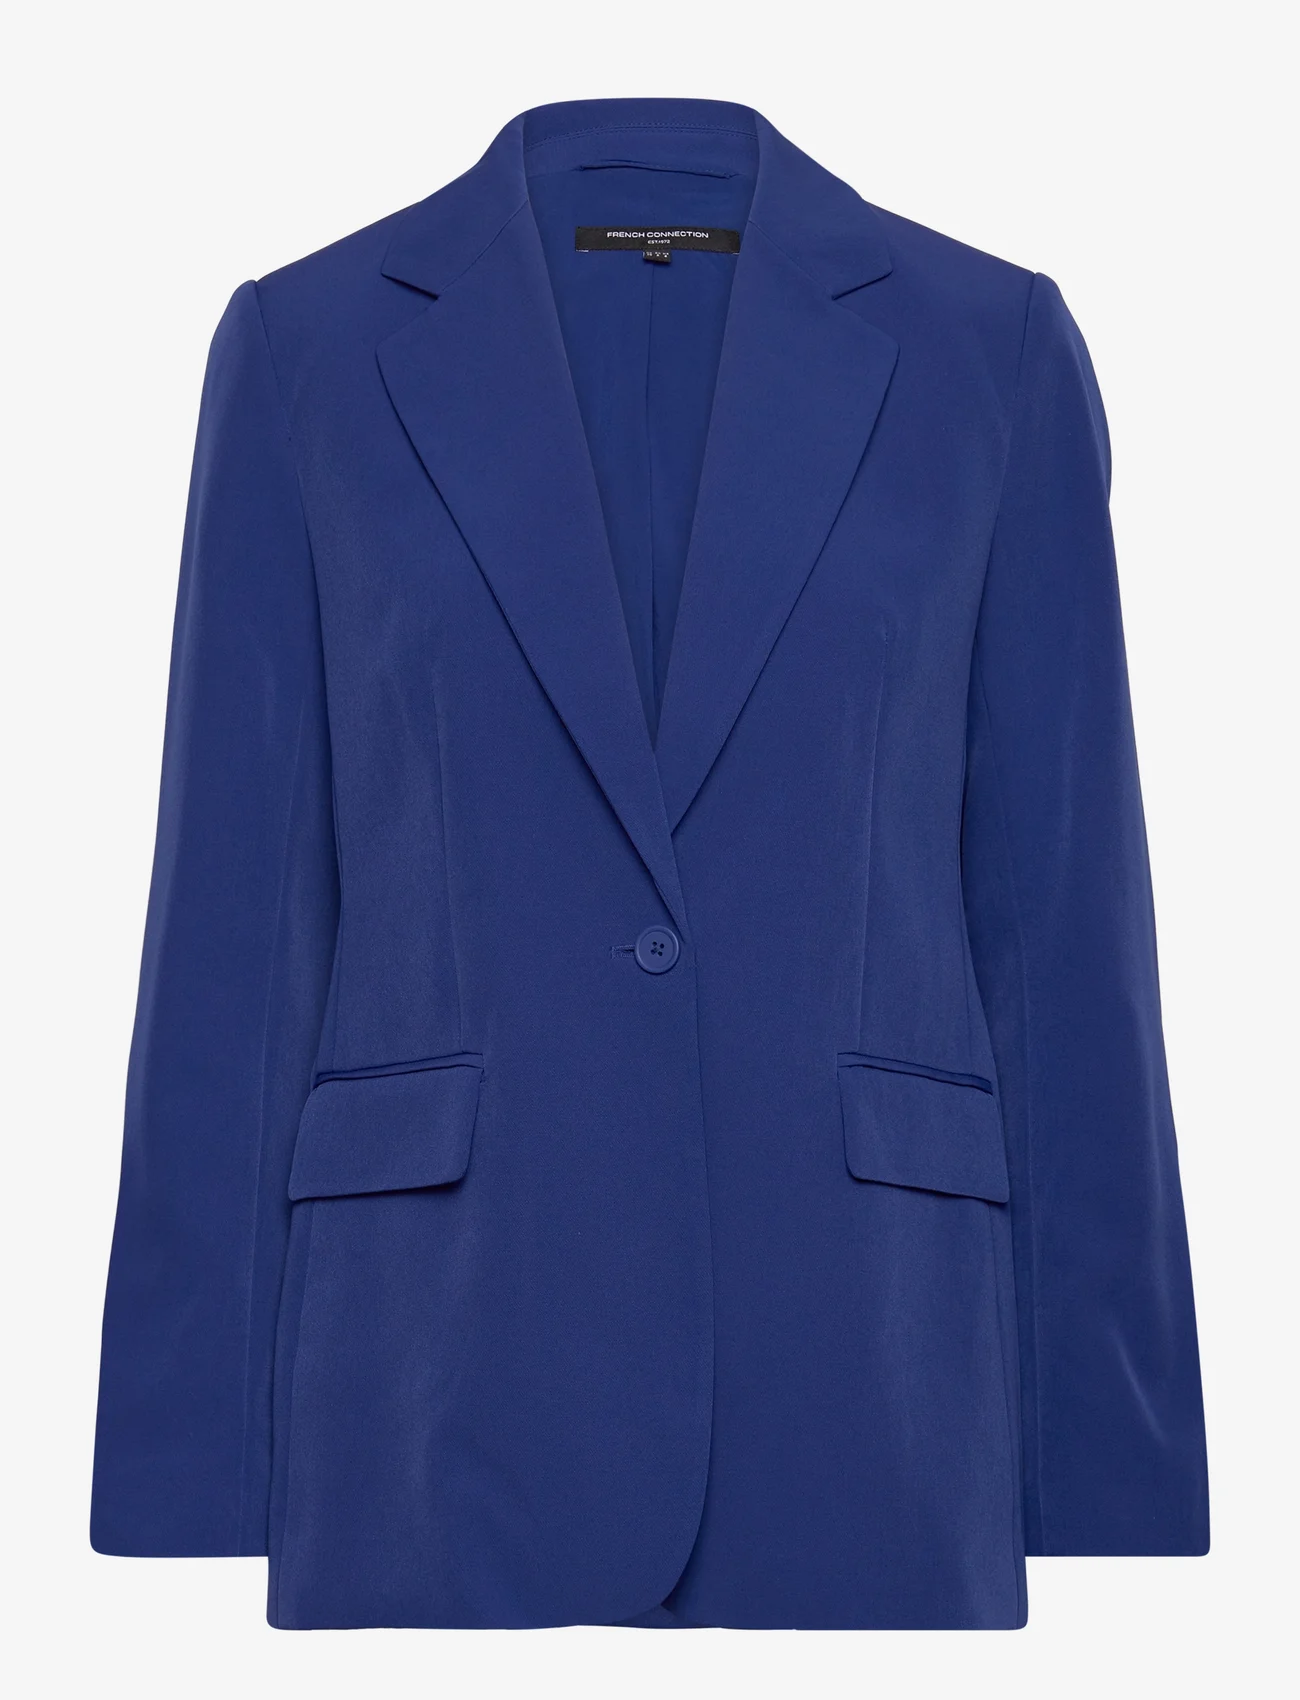 French Connection - ECHO SINGLE BREASTED BLAZER - single breasted blazers - cobalt blue - 1